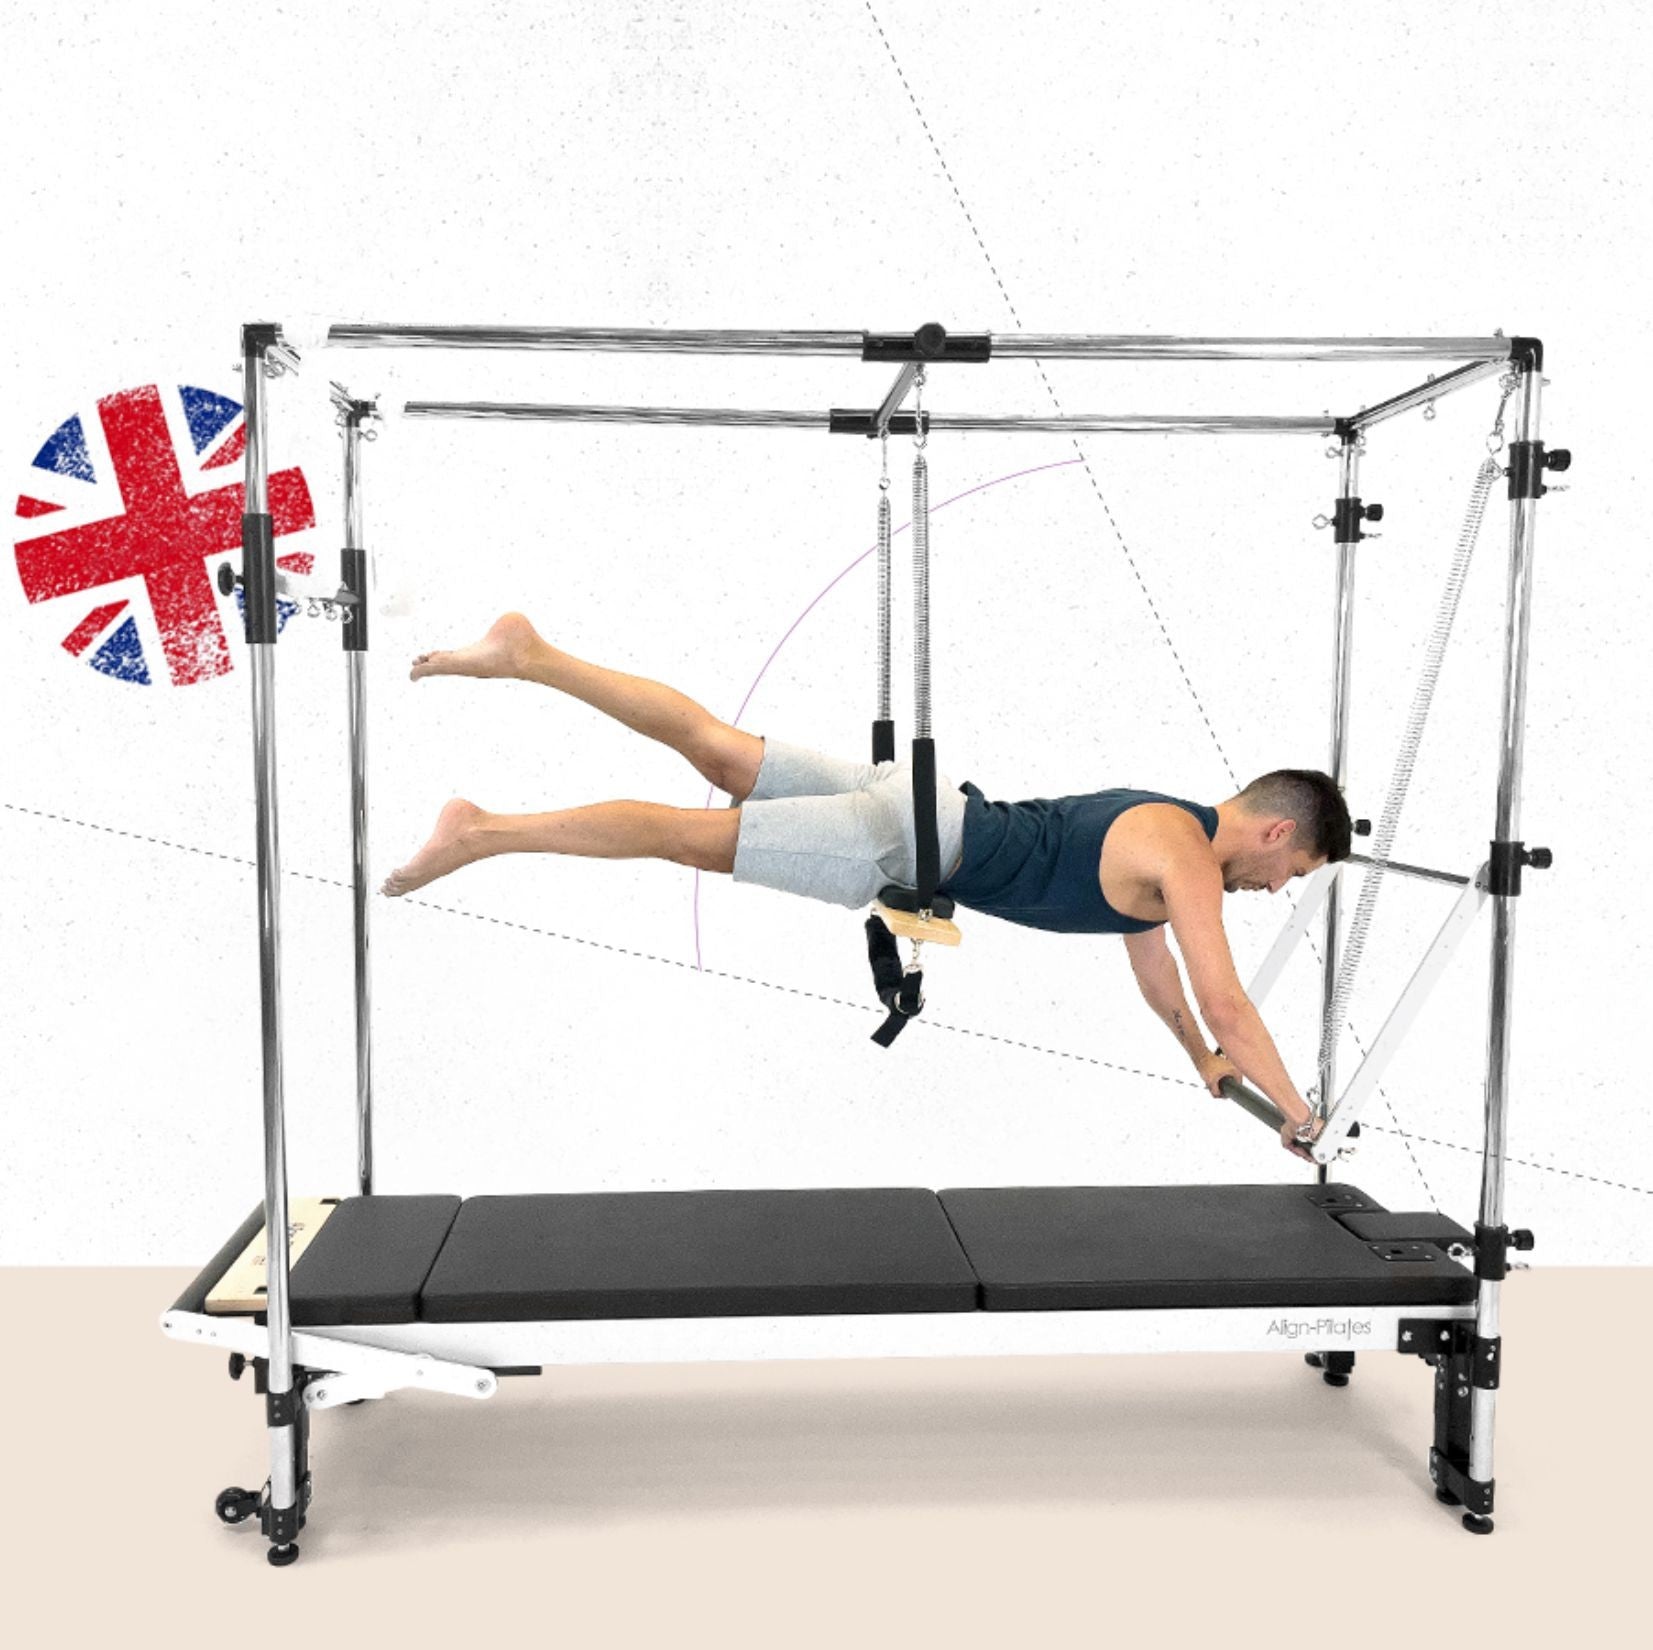 Align-Pilates® C Reformer with Trapeze